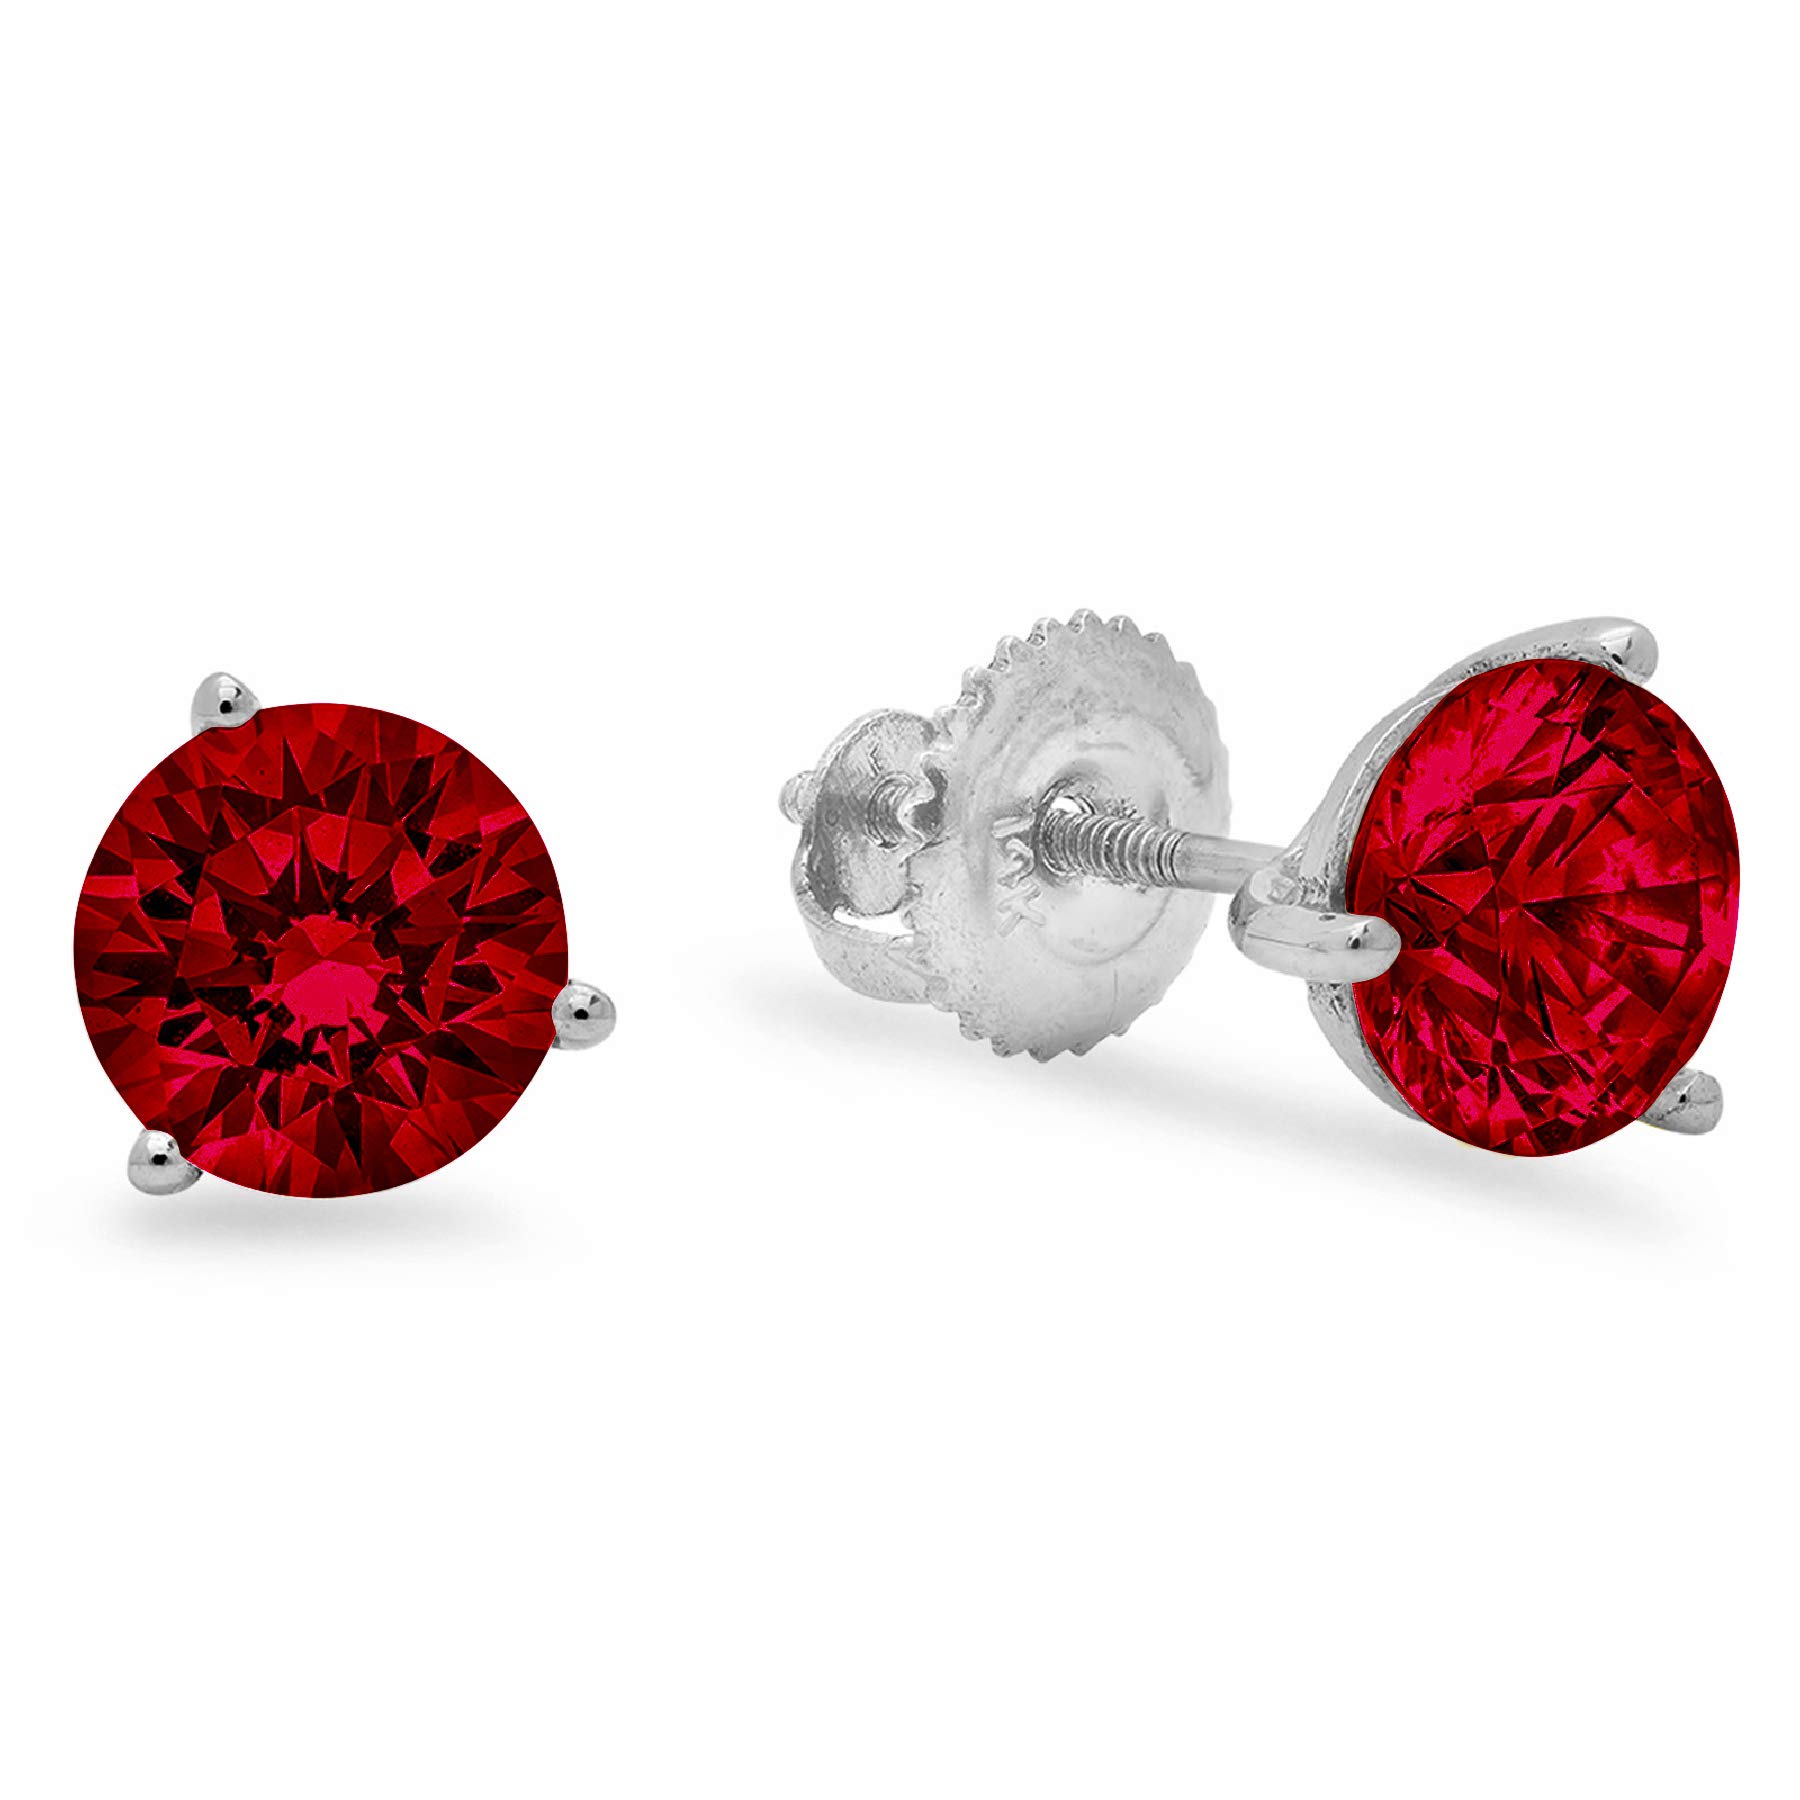 2.0 ct Round Cut Solitaire Natural Deep Pomegranate Dark Red Garnet gemstone Designer 3 prong Stud Martini Earrings Solid 14k White Gold Screw Back Clara Pucci